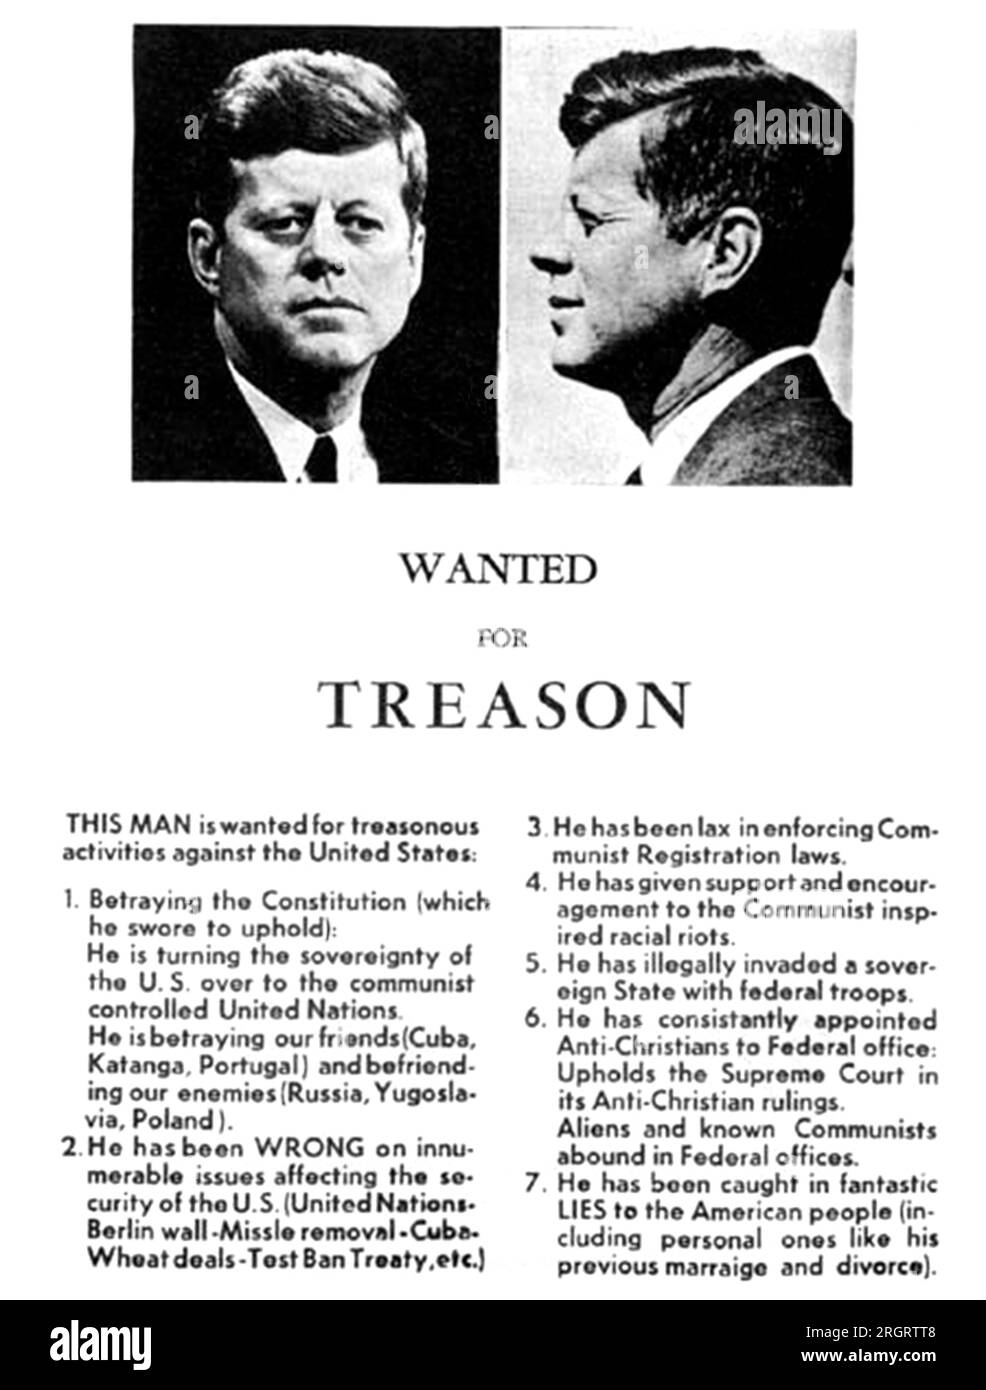 Dallas, Texas:  November 21, 1963 A famous handbill circulated in Dallas the day before President Kennedy was assassinated. Stock Photo